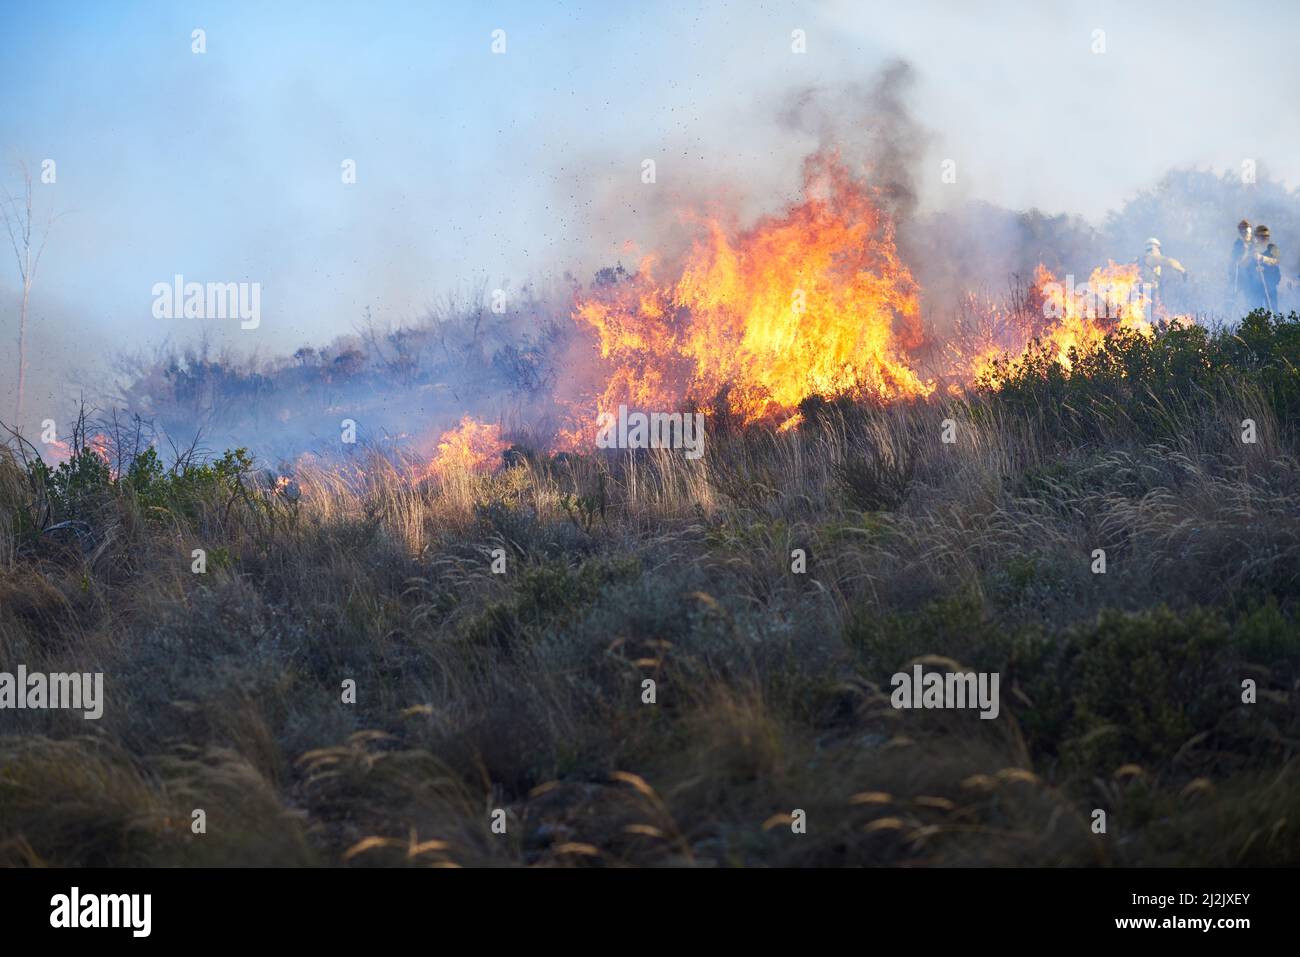 Burning everything in its path. Shot of a wild fire burning. Stock Photo